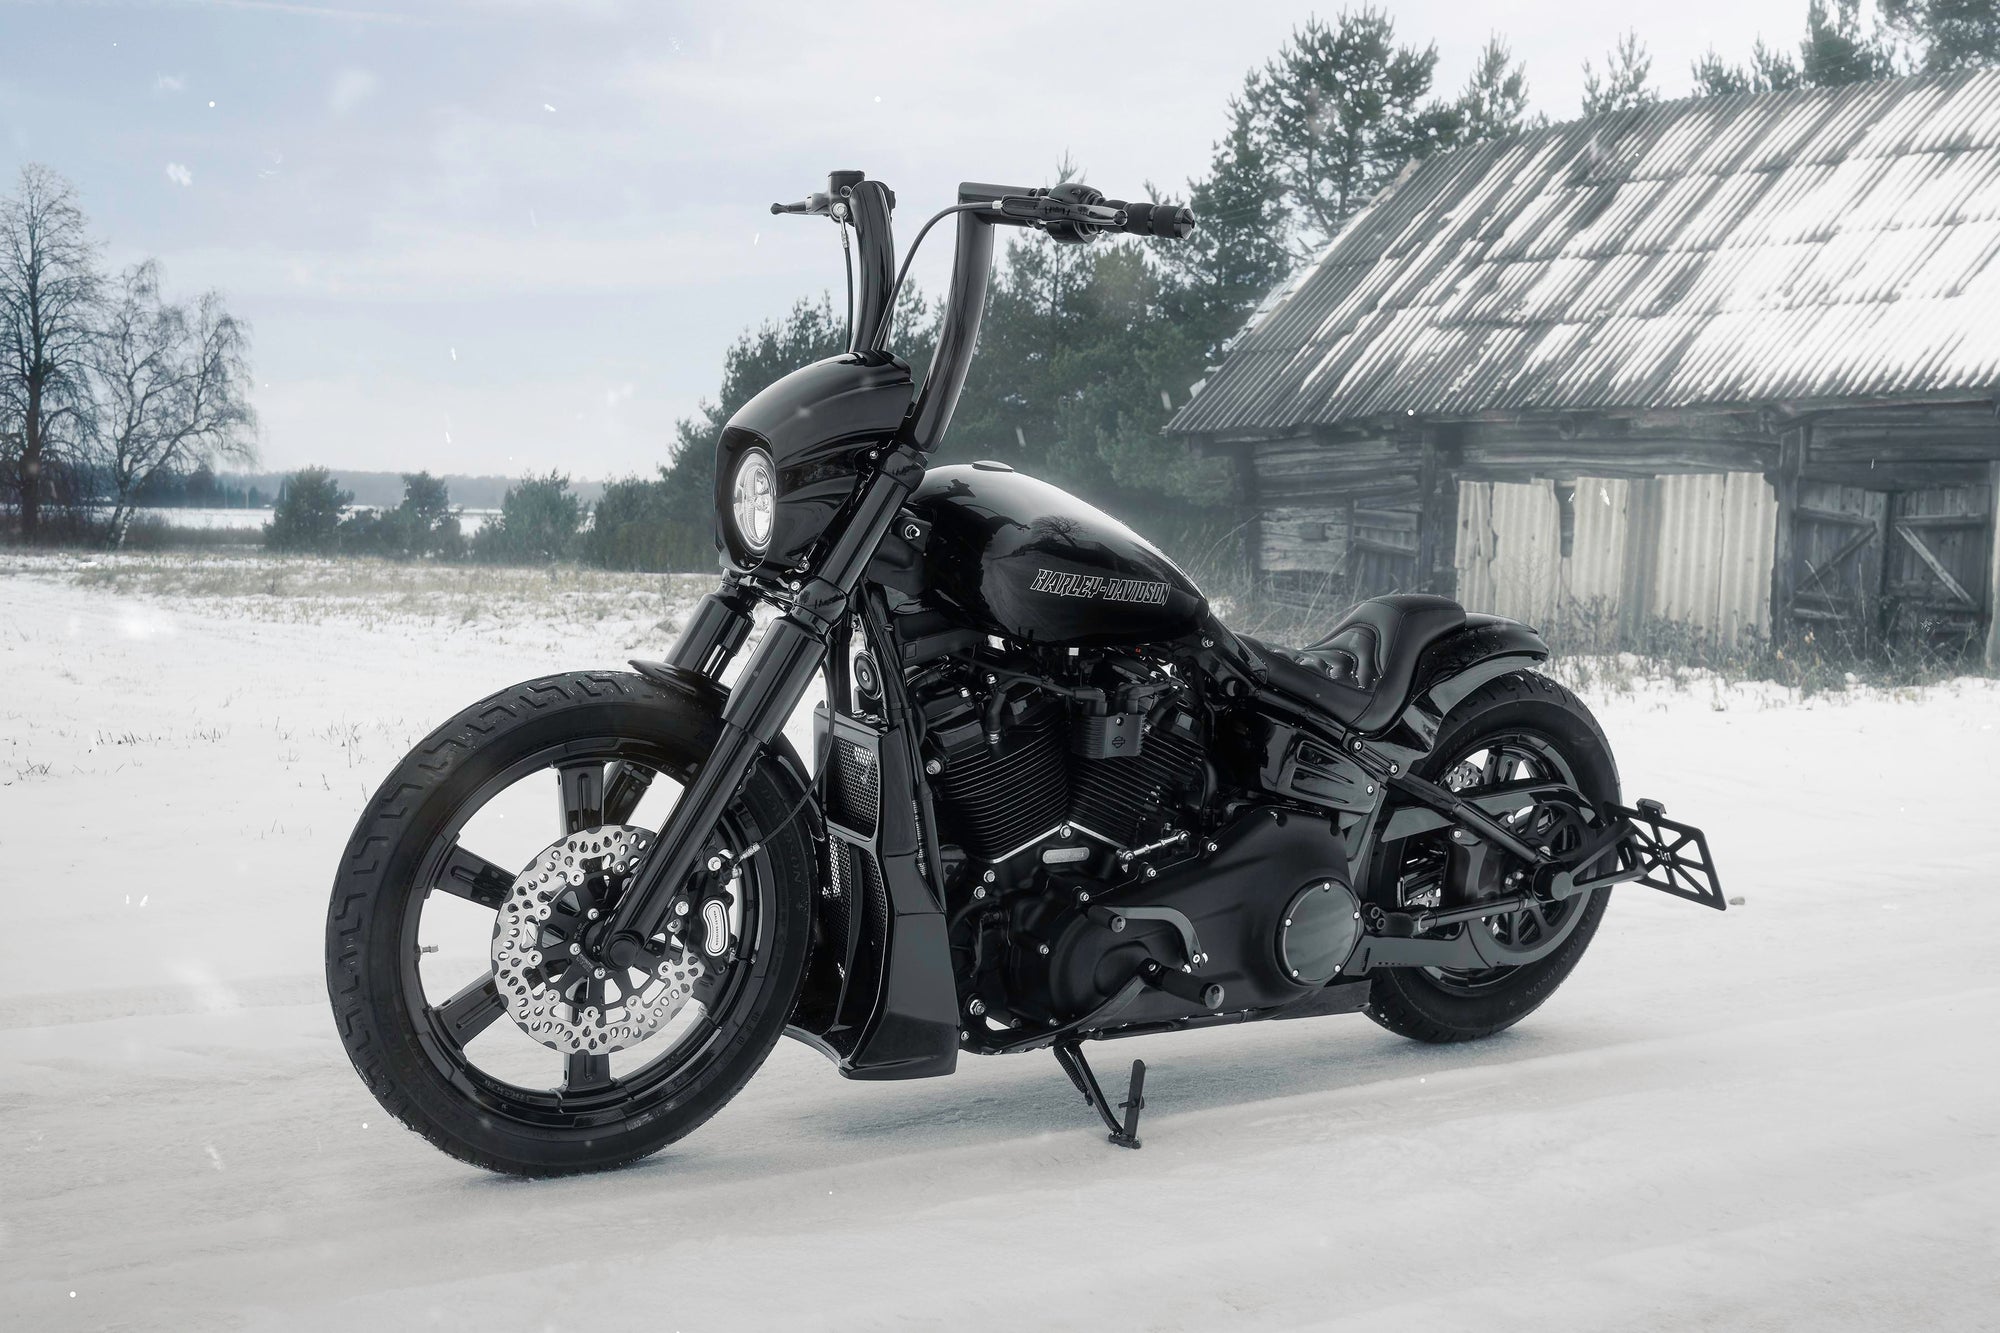 Modified Harley Davidson Softail motorcycle with Killer Custom parts from the side outside on a gloomy winter day with an abandoned shack in the background